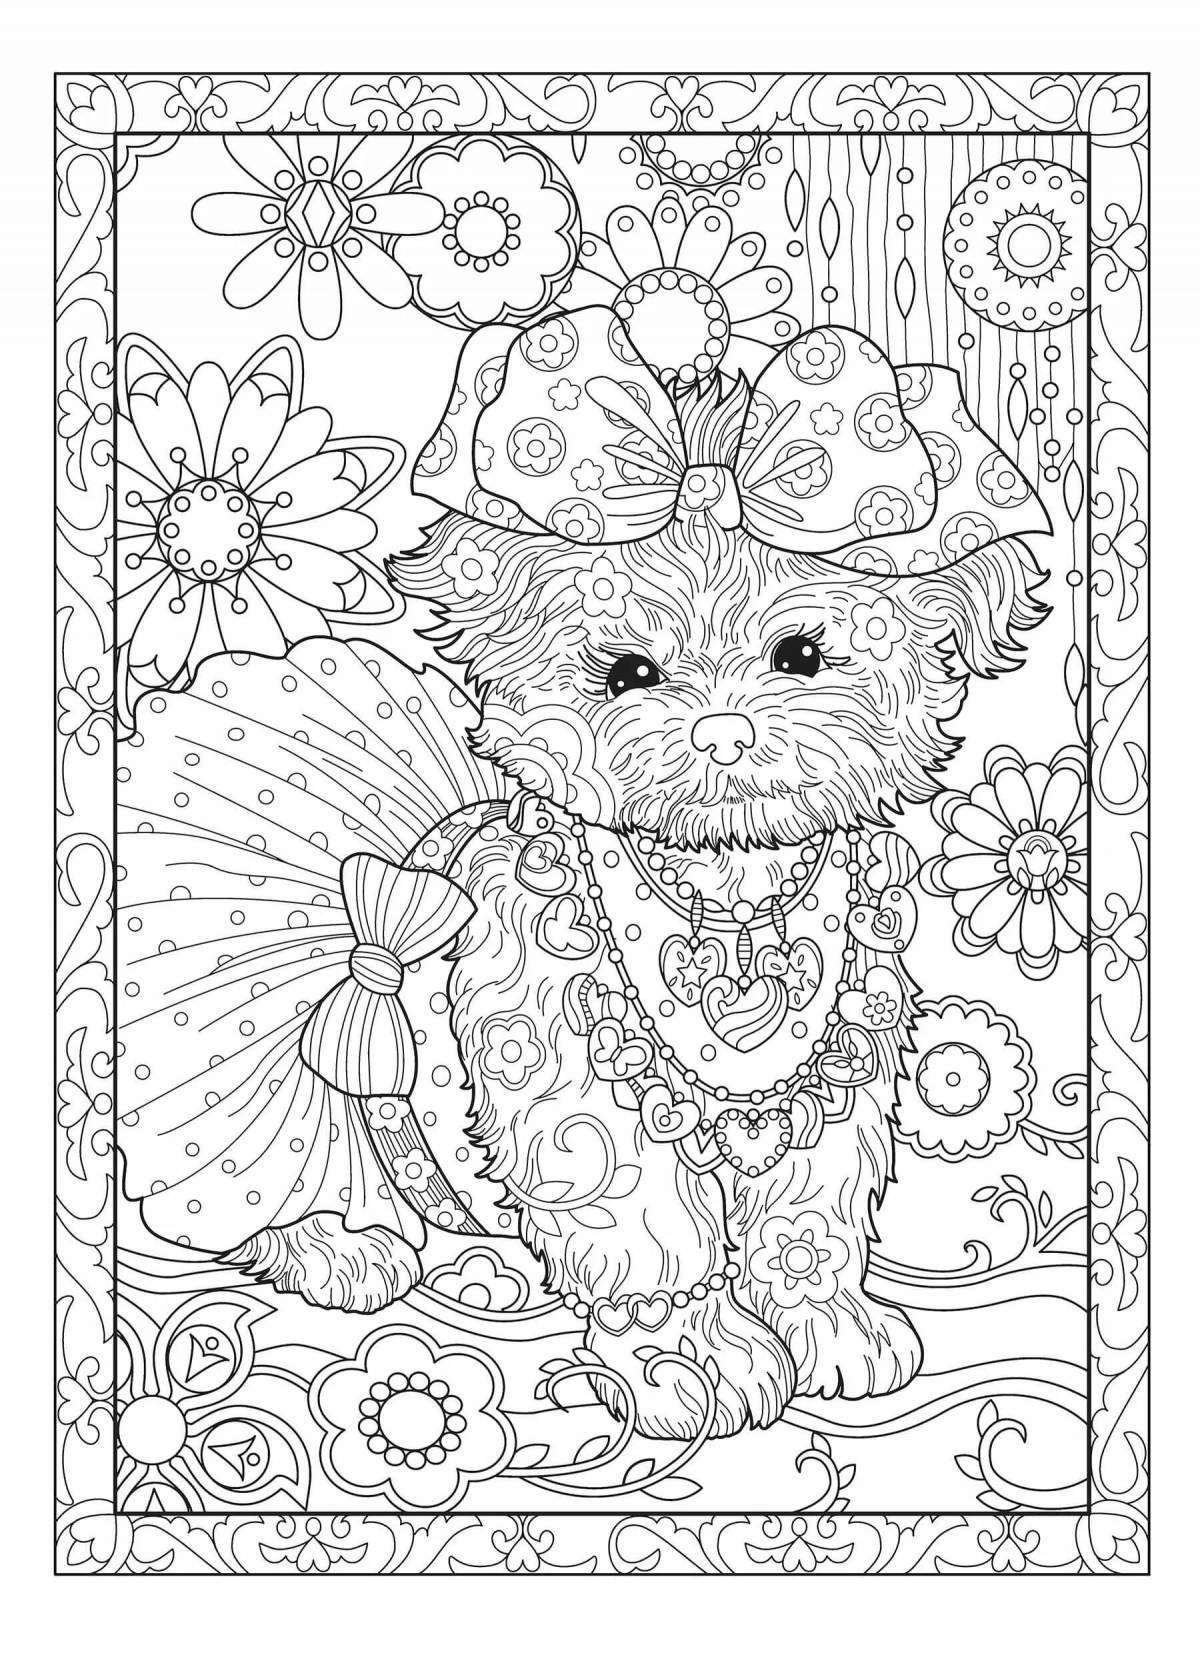 Colourful antistress coloring book for girls 10-12 years old